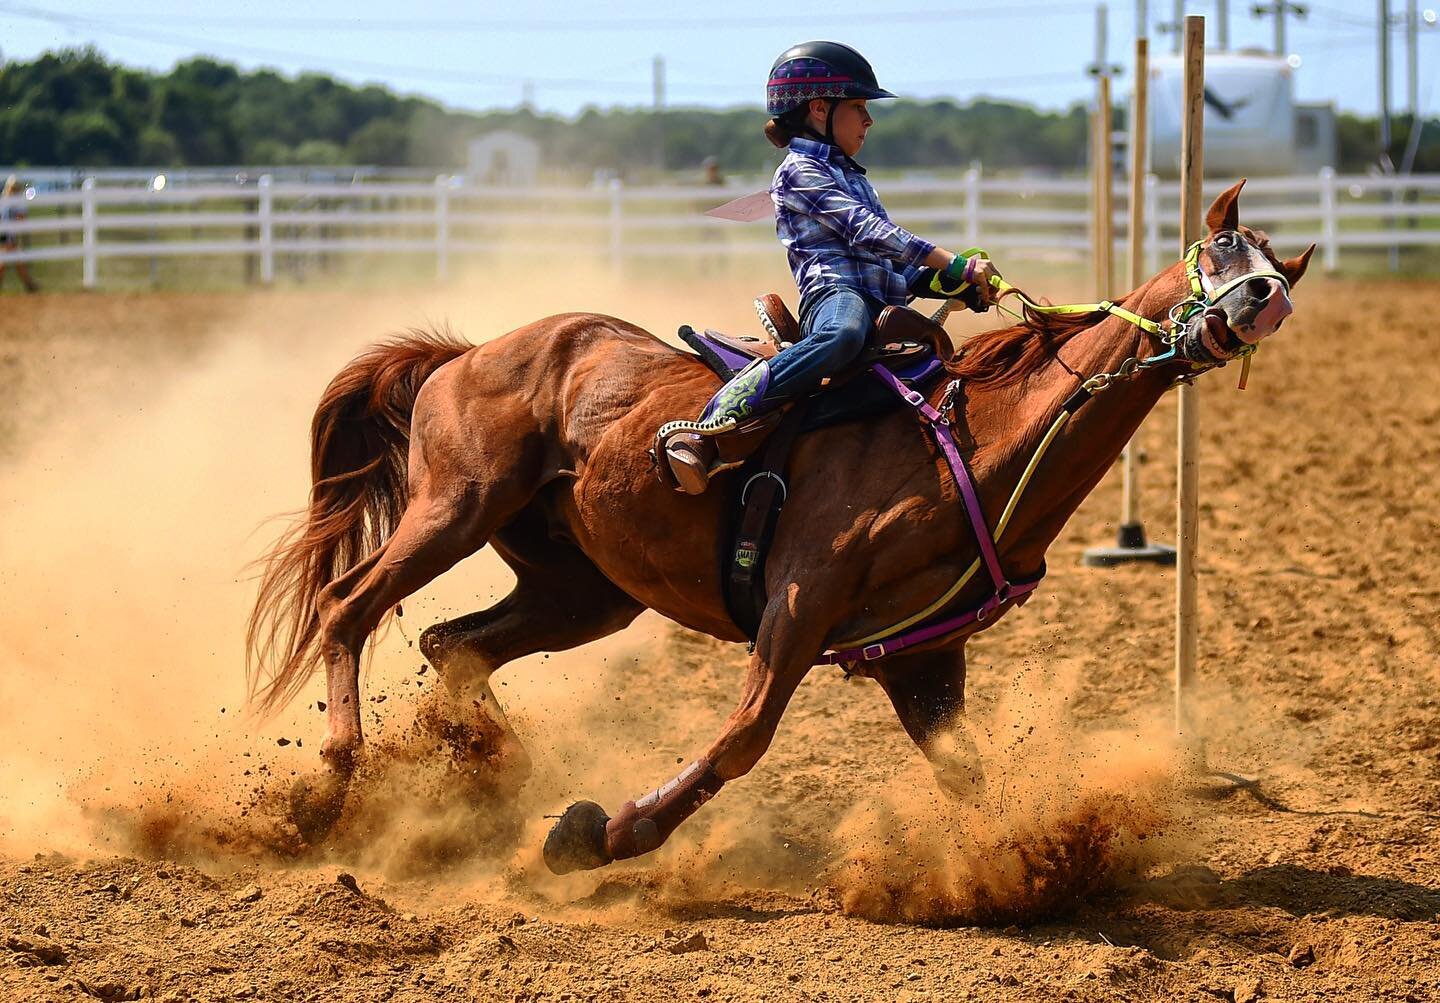 Lilly Chenoweth, 11, of South Amherst, rounds a turn in the Lorain County Junior Fair pole bending competition on Wednesday afternoon, August 26. Chenoweth is riding Leigha Hostal's horse, Cody, in the contest. Hostal passed away after a car accident